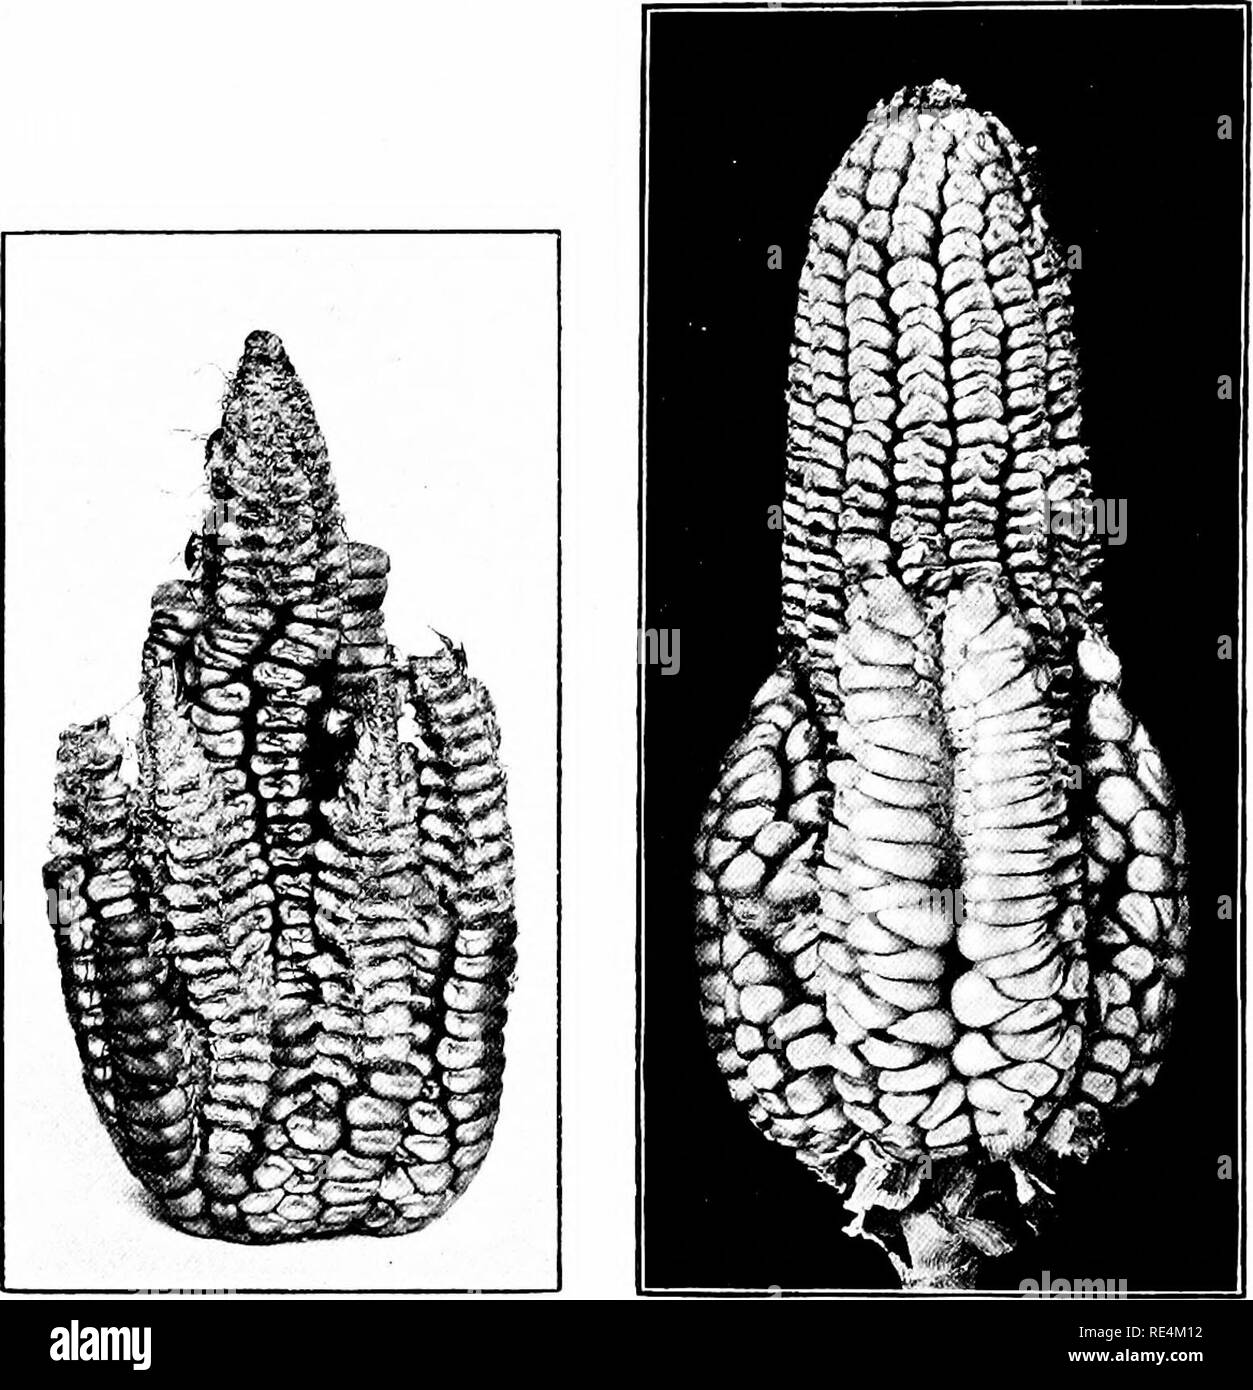 . Maize; its history, cultivation, handling, and uses, with special reference to South Africa; a text-book for farmers, students of agriculture, and teachers of nature study. Corn; Corn. 102 MAIZE CHAP, less cylindrical or tapering core, the cob, bearing from 4 to 48 rows of immature grains or carpels (Fig. 46). Though the maize ear has a solid core, it is in reality made up of two or more connate, two-rowed spikes which have grown together, or failed to separate, during their early de-. Fig. 4g.—Branched ear of Hickory King. Fig. 50.—Branched ear of Ladysmith. velopment. Each spike bears at t Stock Photo